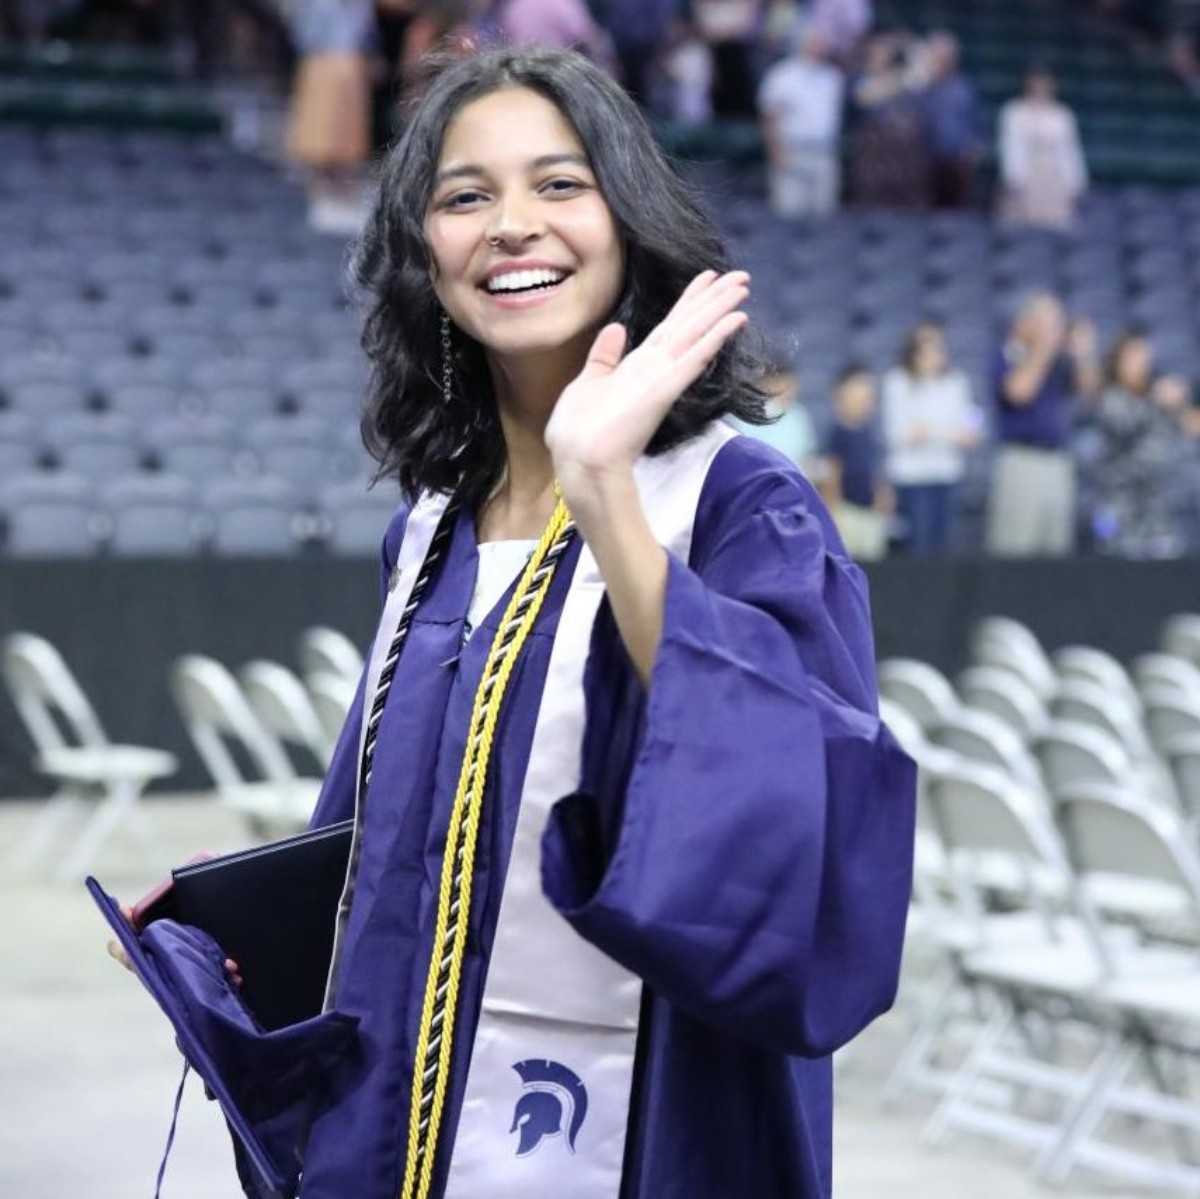 PV graduate Shobini Iyer exits the graduation ceremony after delivering her speech, High school is like writing a story.